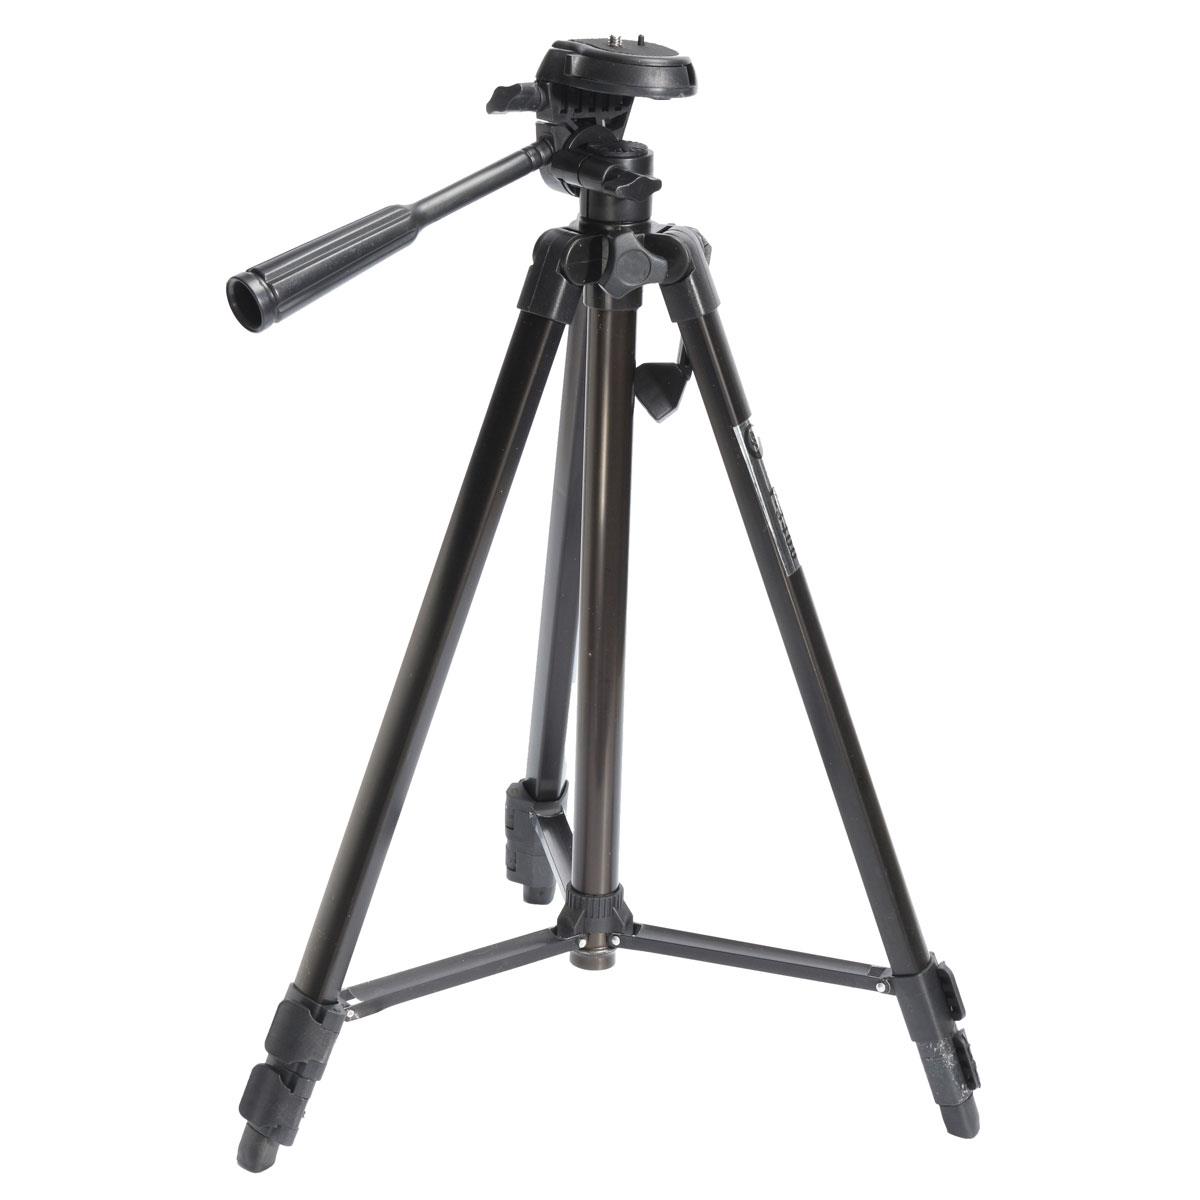 

ZHUOYUE 3400 Portable 54 Inch Tripod Stand With 360 Degree Swivel Ball Head And Bag For Camera